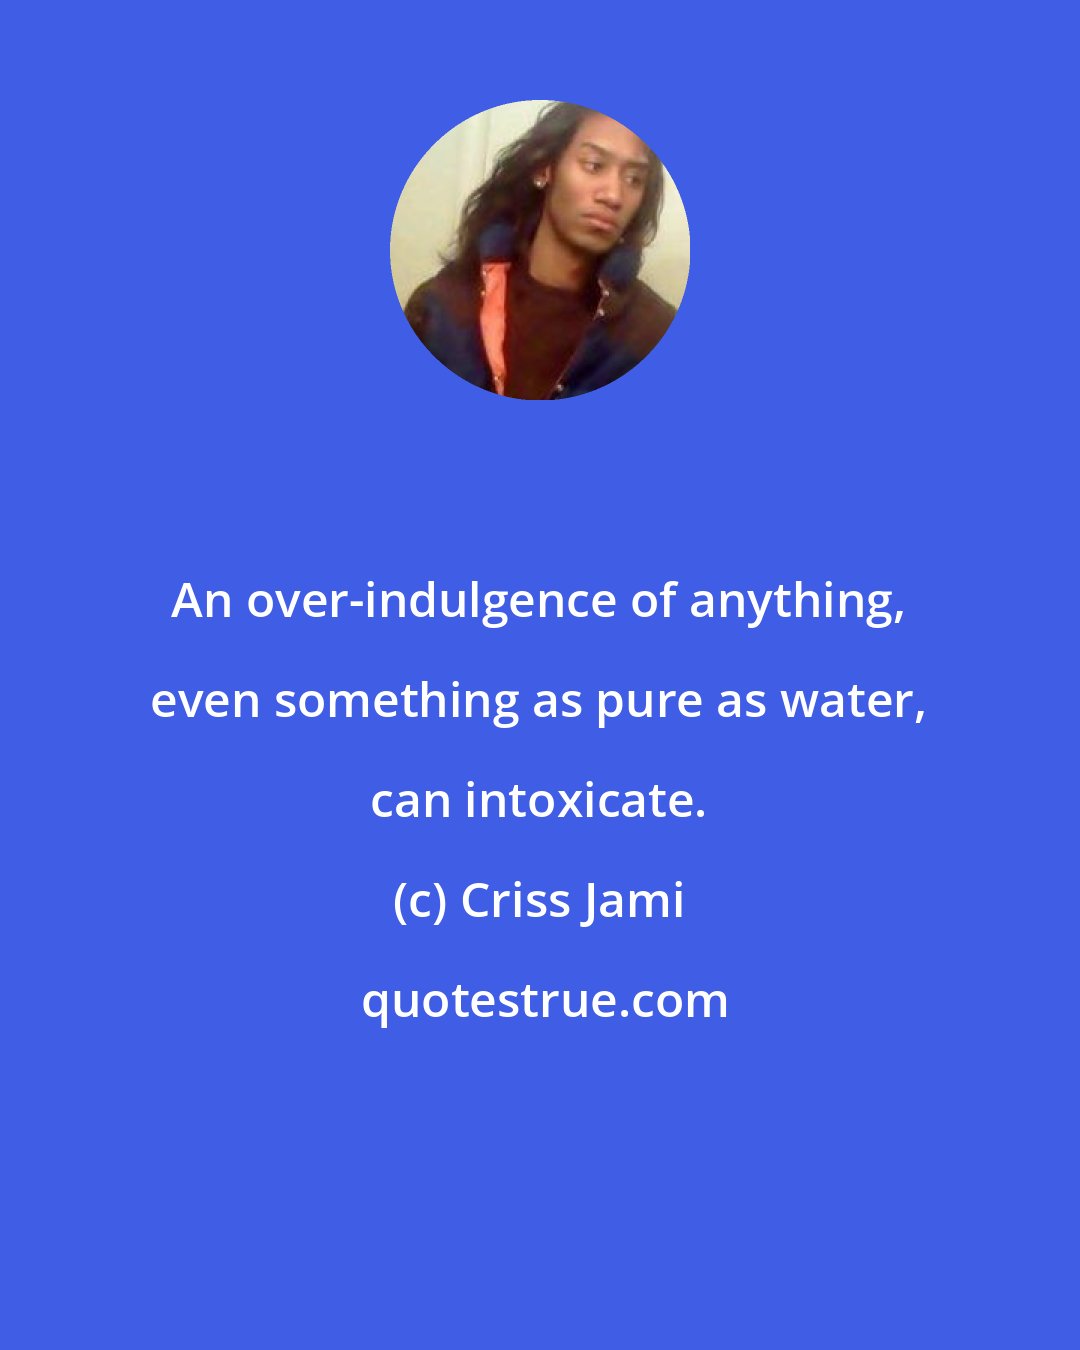 Criss Jami: An over-indulgence of anything, even something as pure as water, can intoxicate.